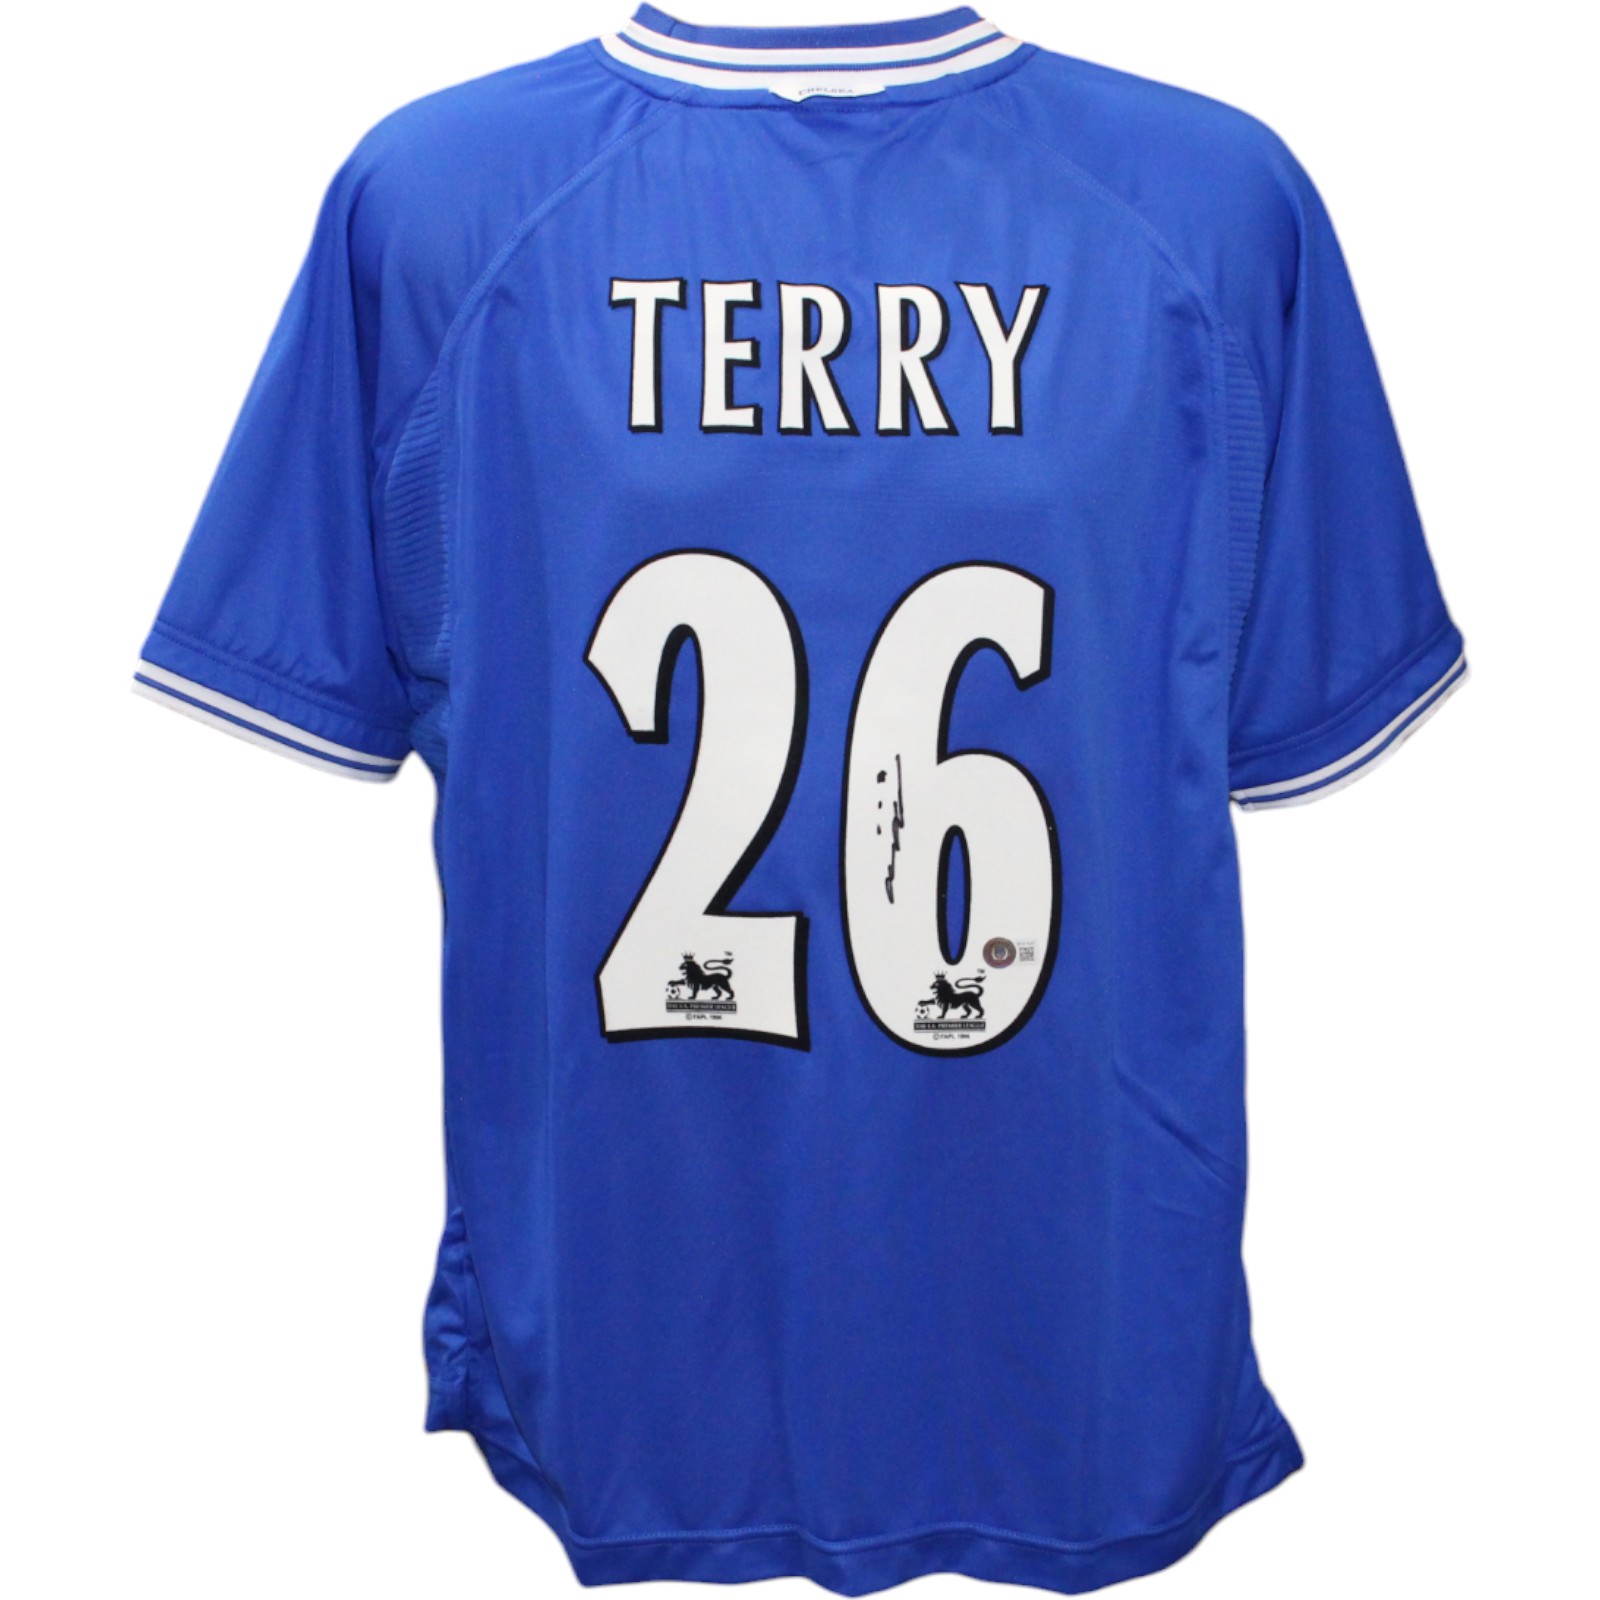 John Terry Autographed/Signed Chelsea Blue Jersey Beckett